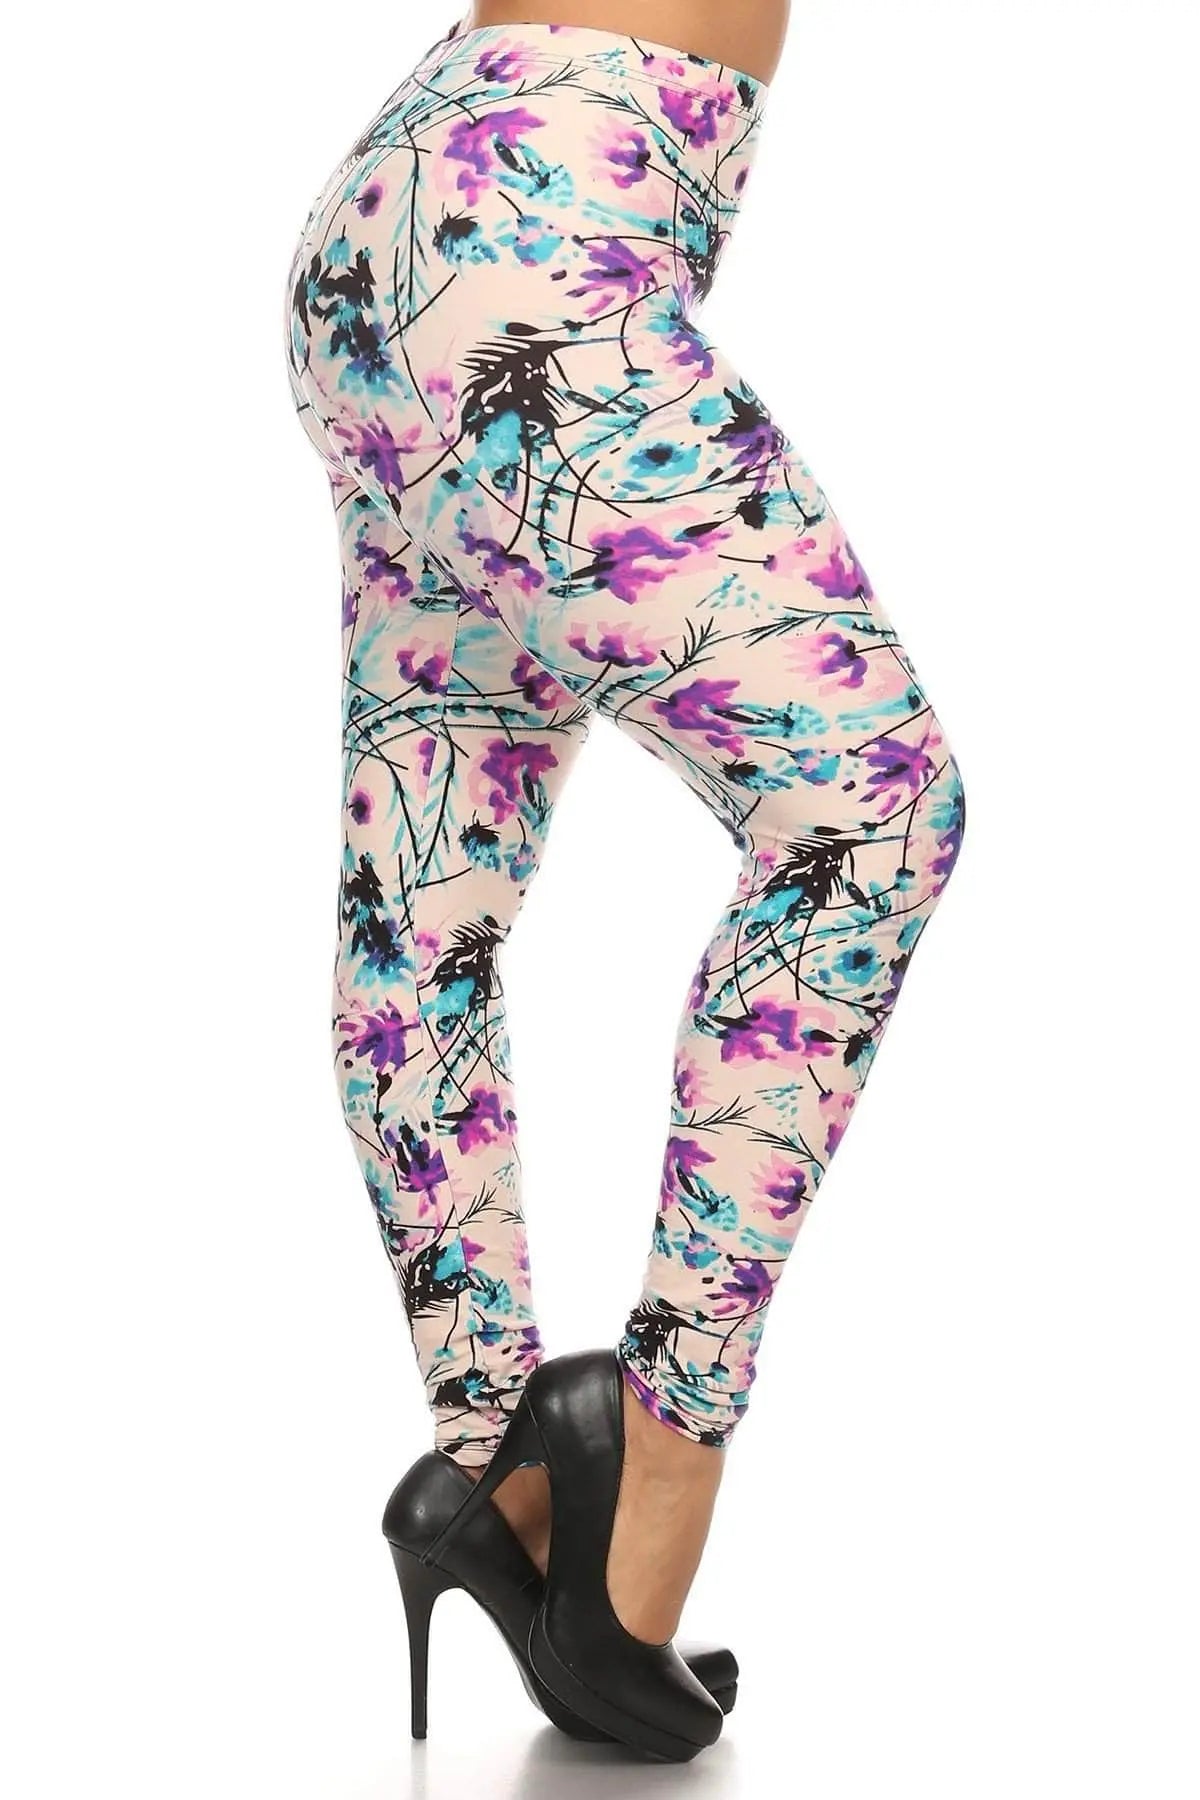 Plus Size Floral Print, Full Length Leggings In A Slim Fitting Style With A Banded High Waist Blue Zone Planet